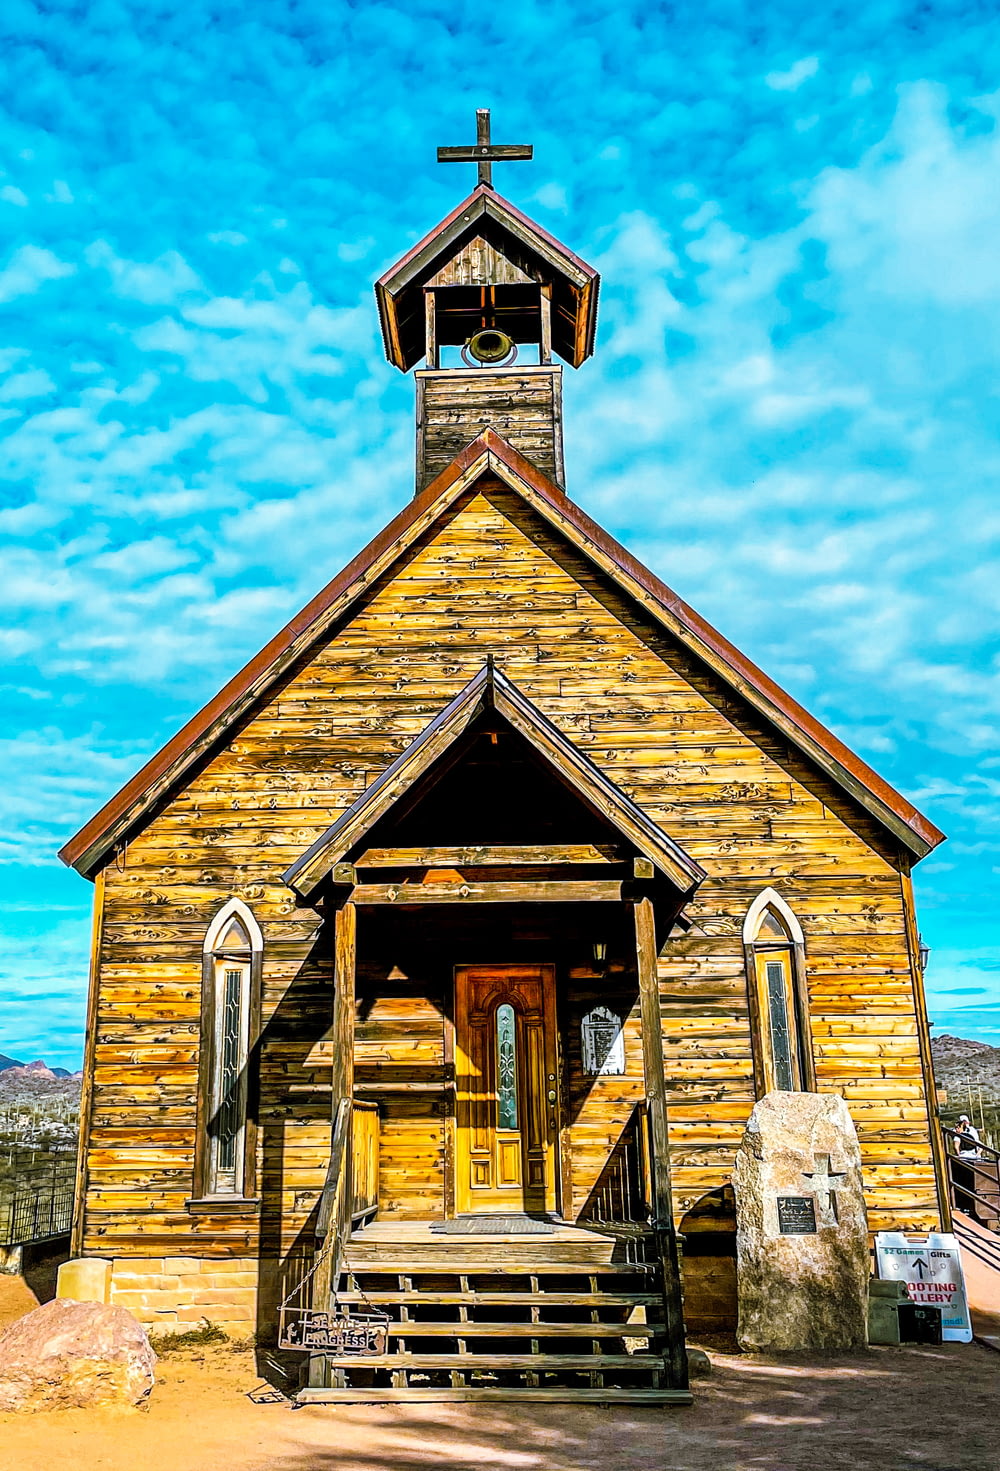 a small wooden church with a cross on top